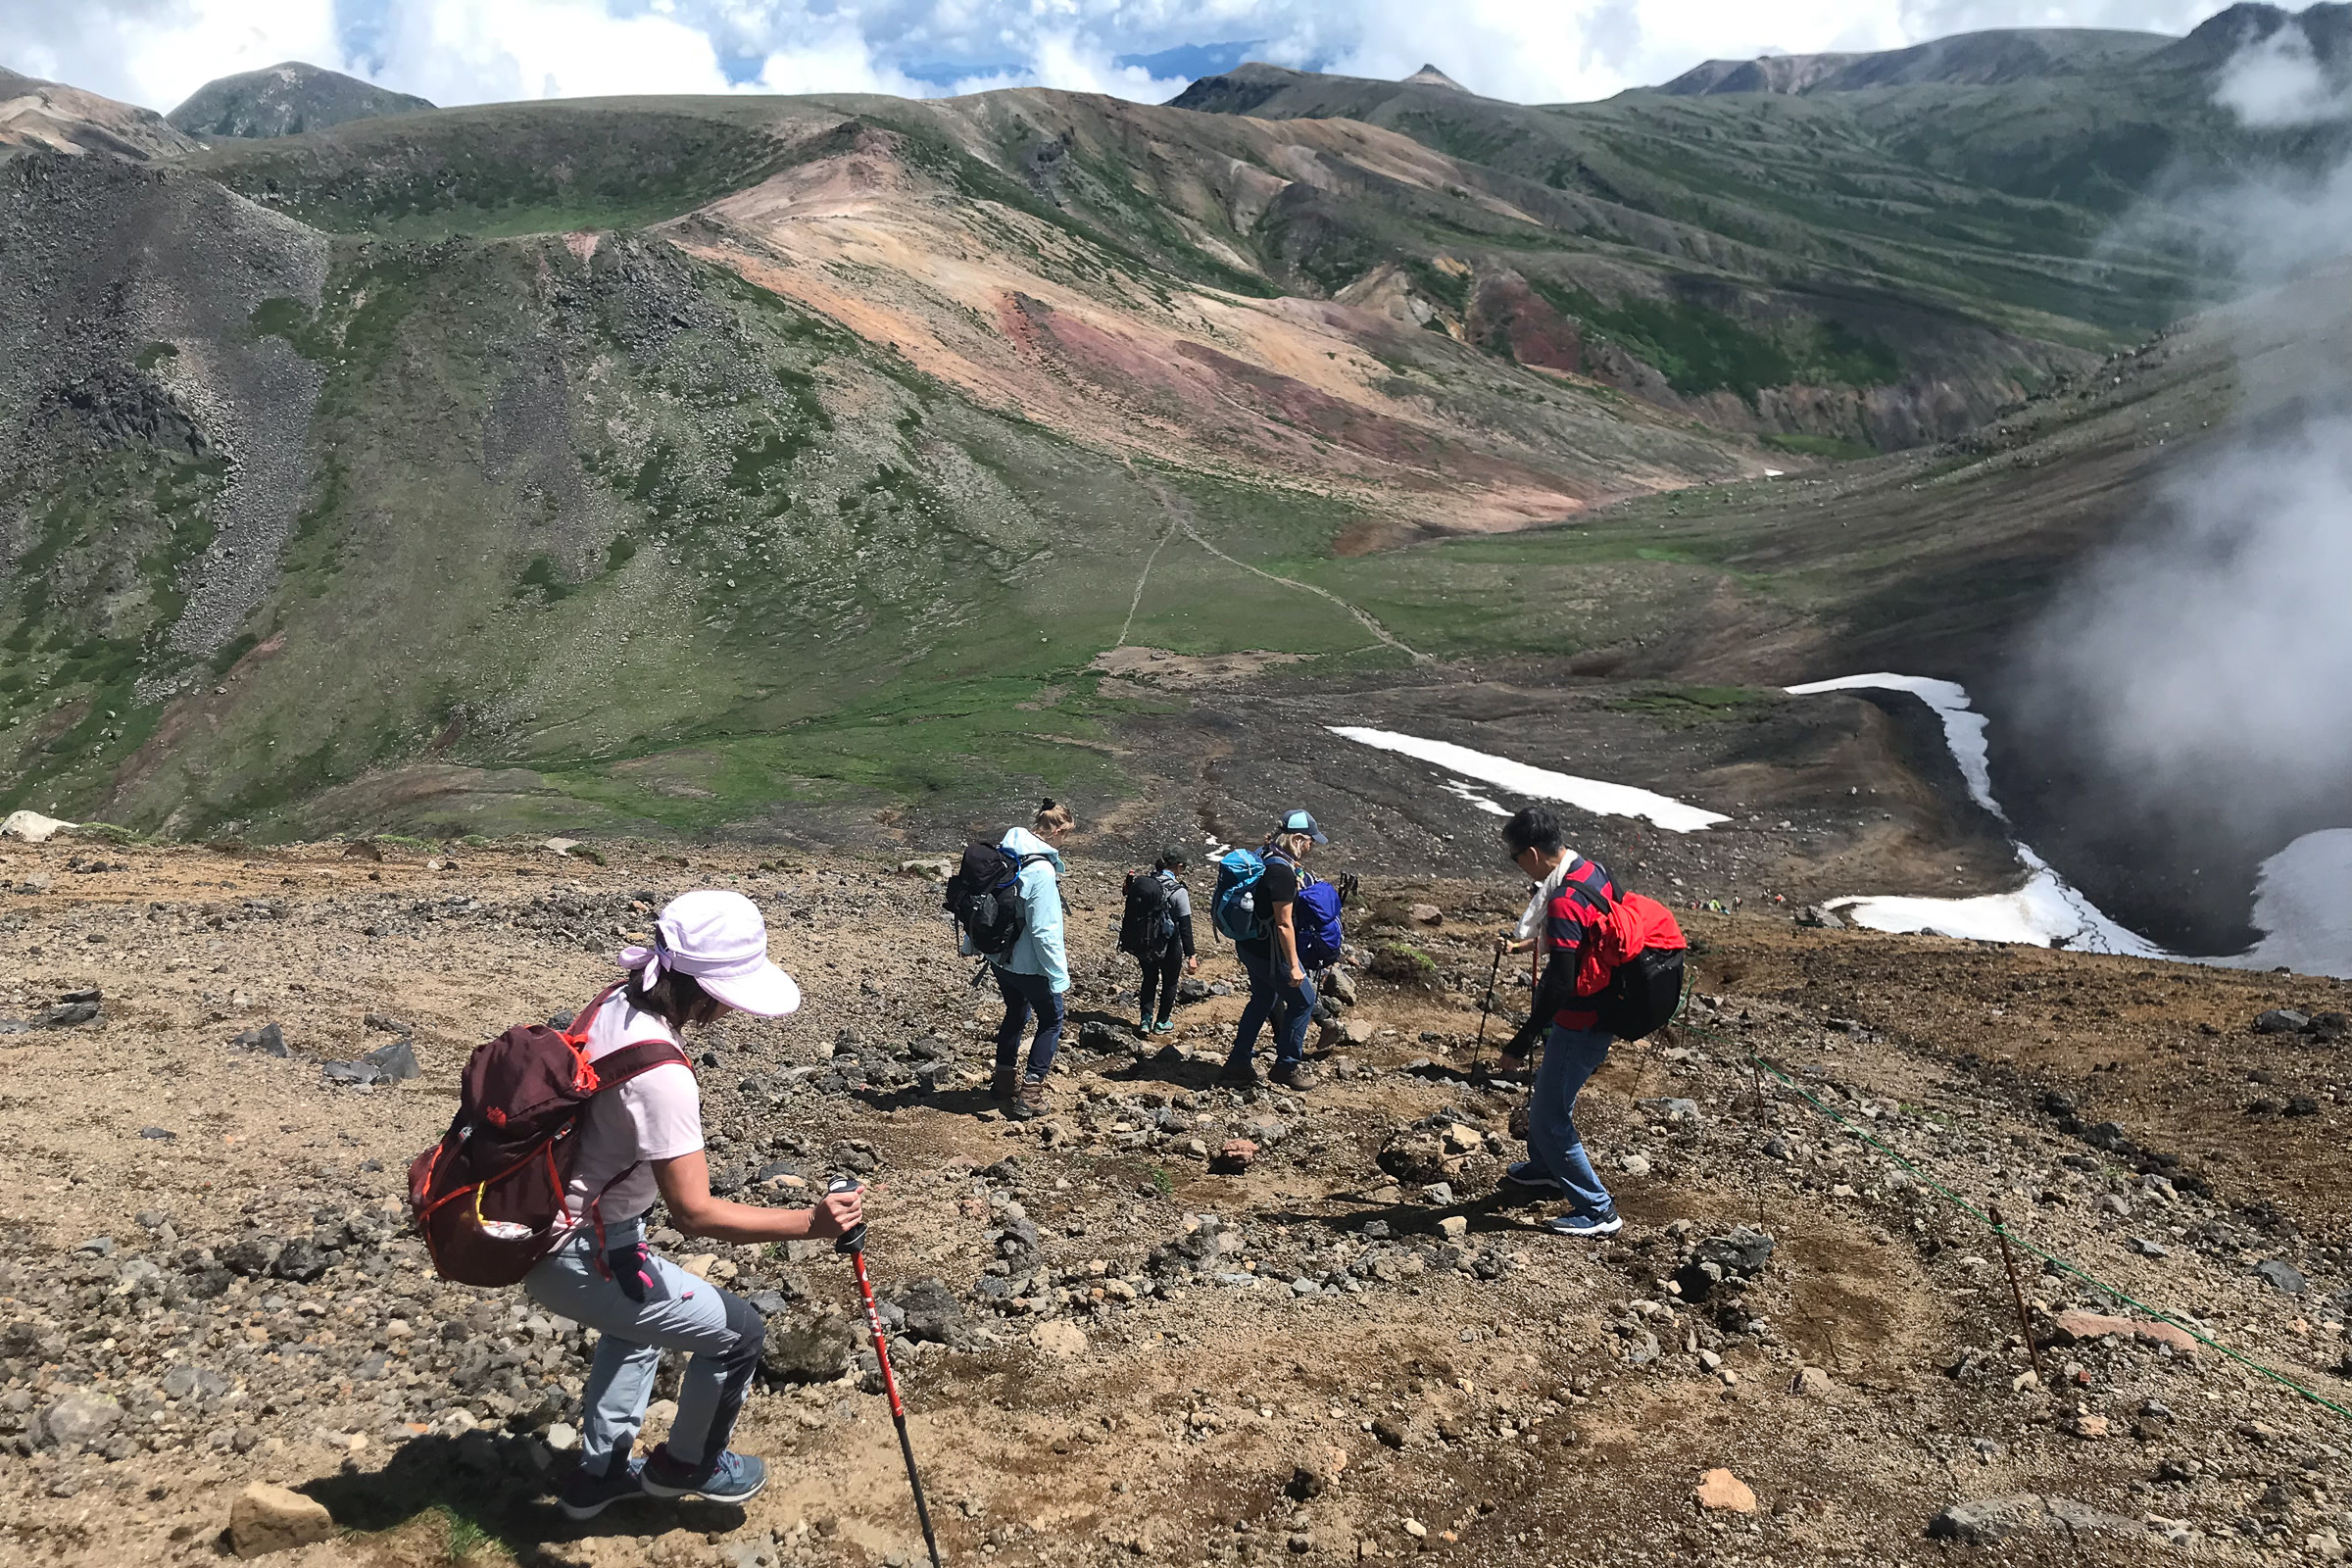 A group of hikers descend a rocky mountain slope. It is a sunny day and there are lingering snows around.